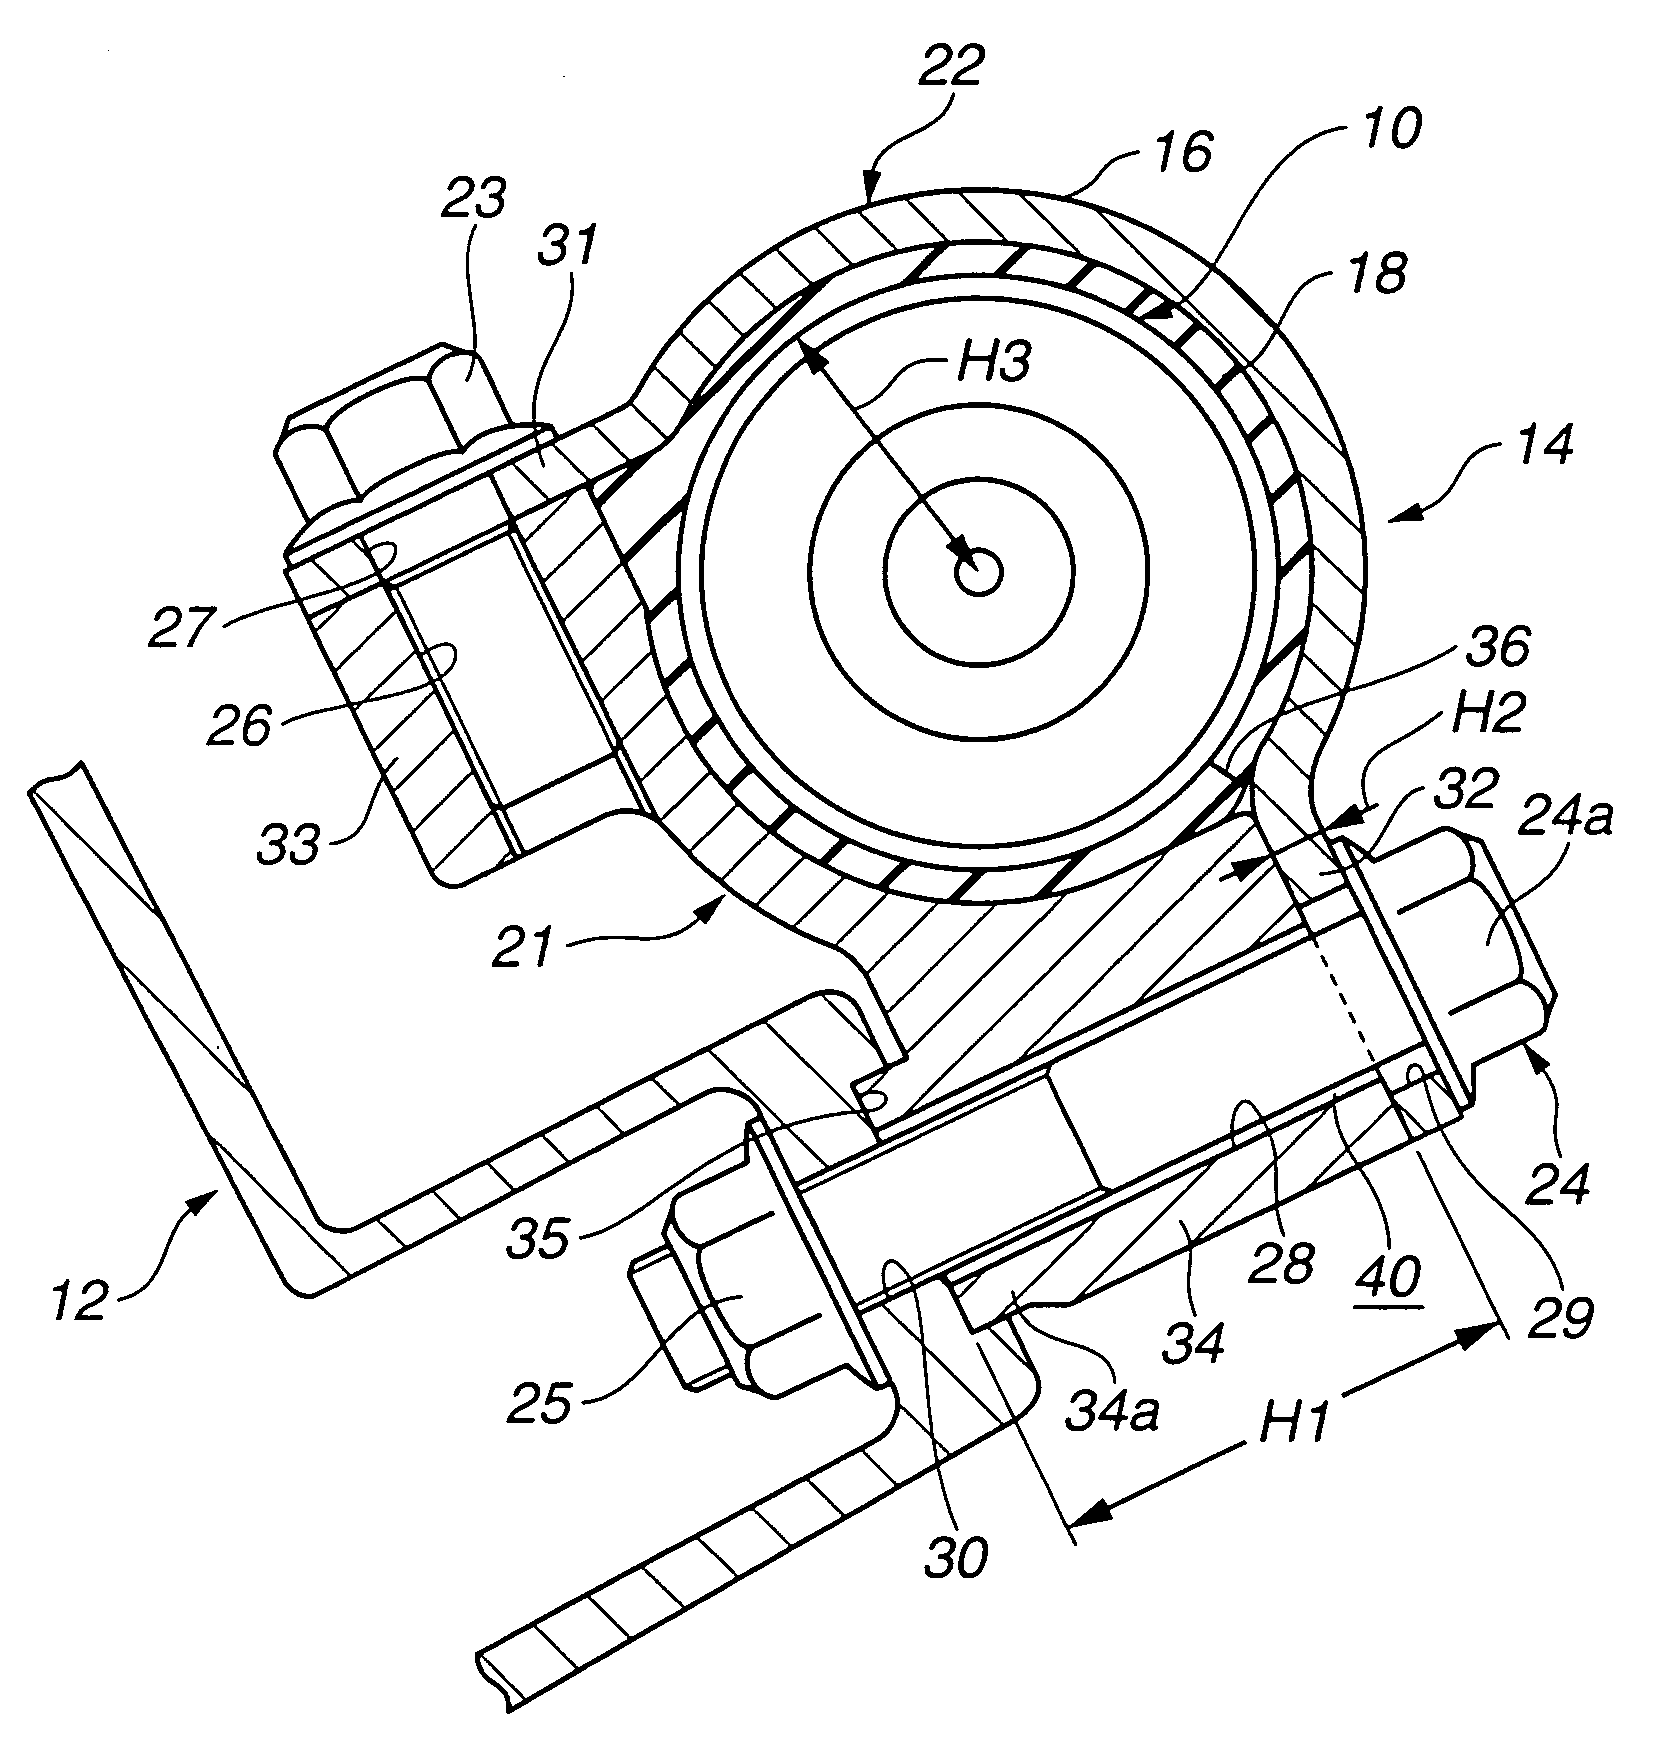 Structure for fixing steering-gear housing